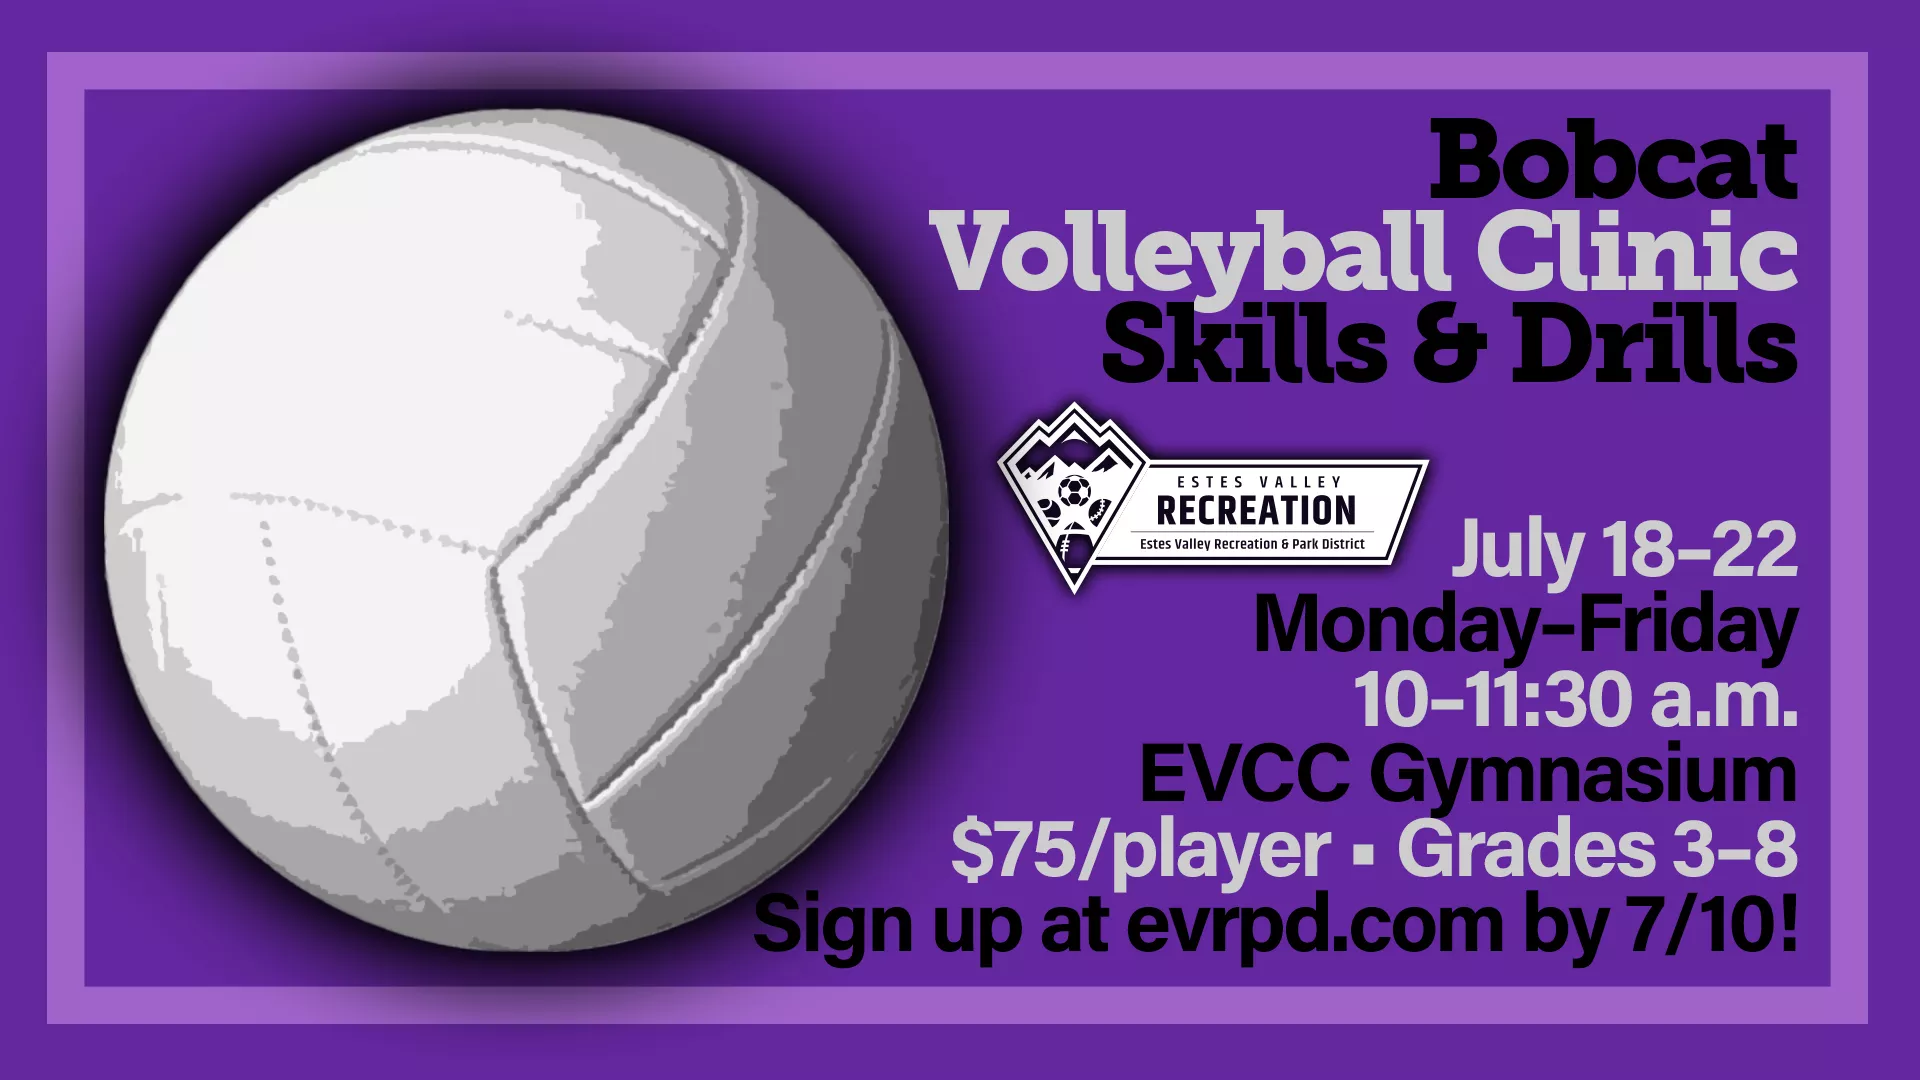 Bobcats Volleyball Clinic for grades 3-8